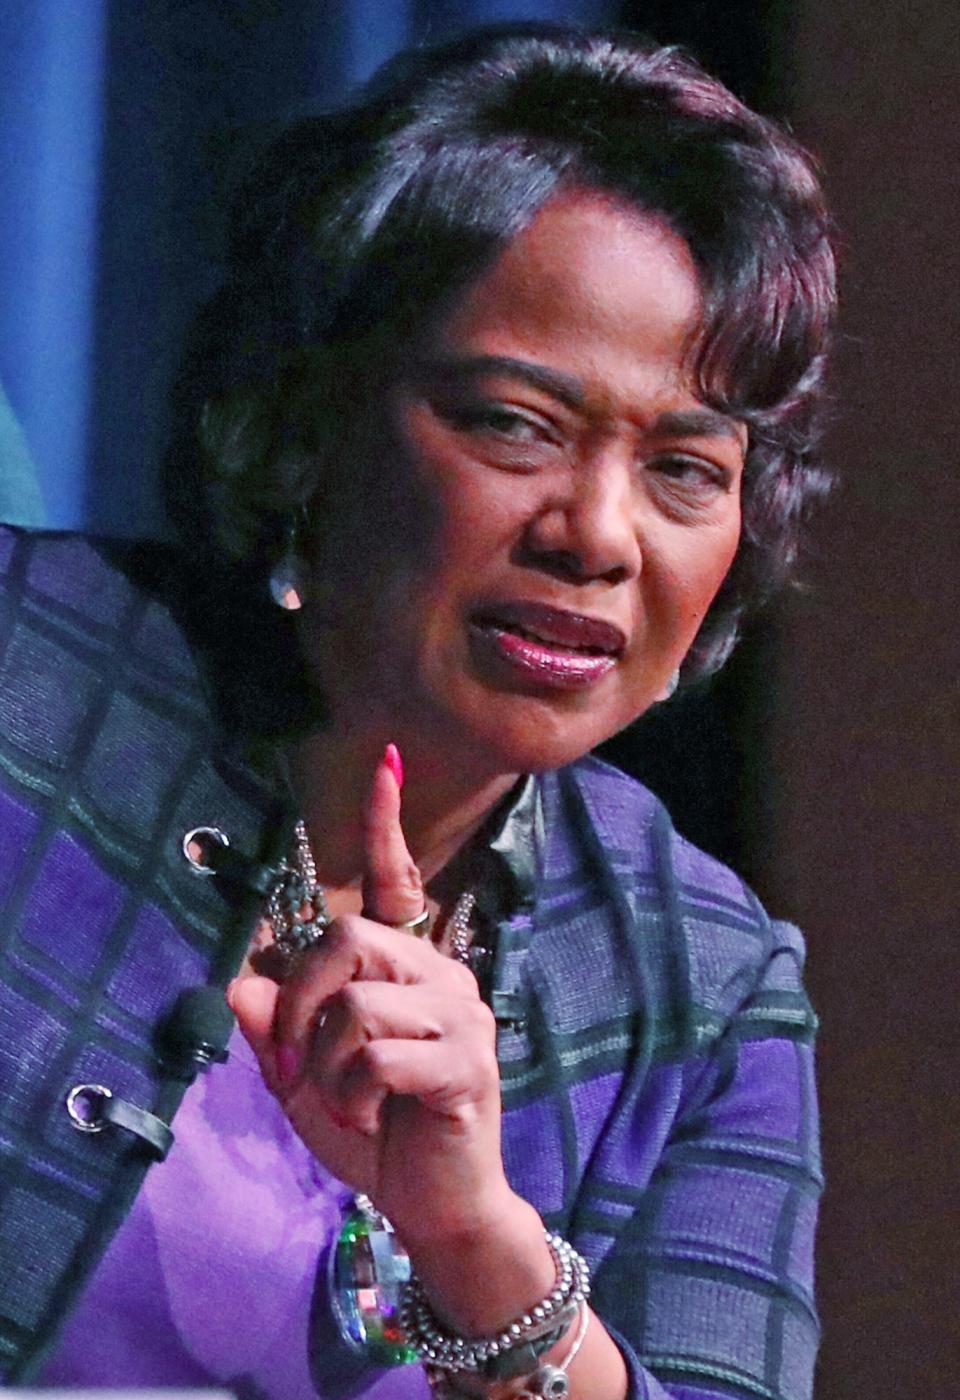 Bernice King, daughter of Martin Luther King Jr. and Coretta Scott King, answers a question from the moderator during her address in the student center ballroom as part of Kent State University's Martin Luther King Jr. Day celebration on Thursday.
(Photo: Mike Cardew, Akron Beacon Journal)